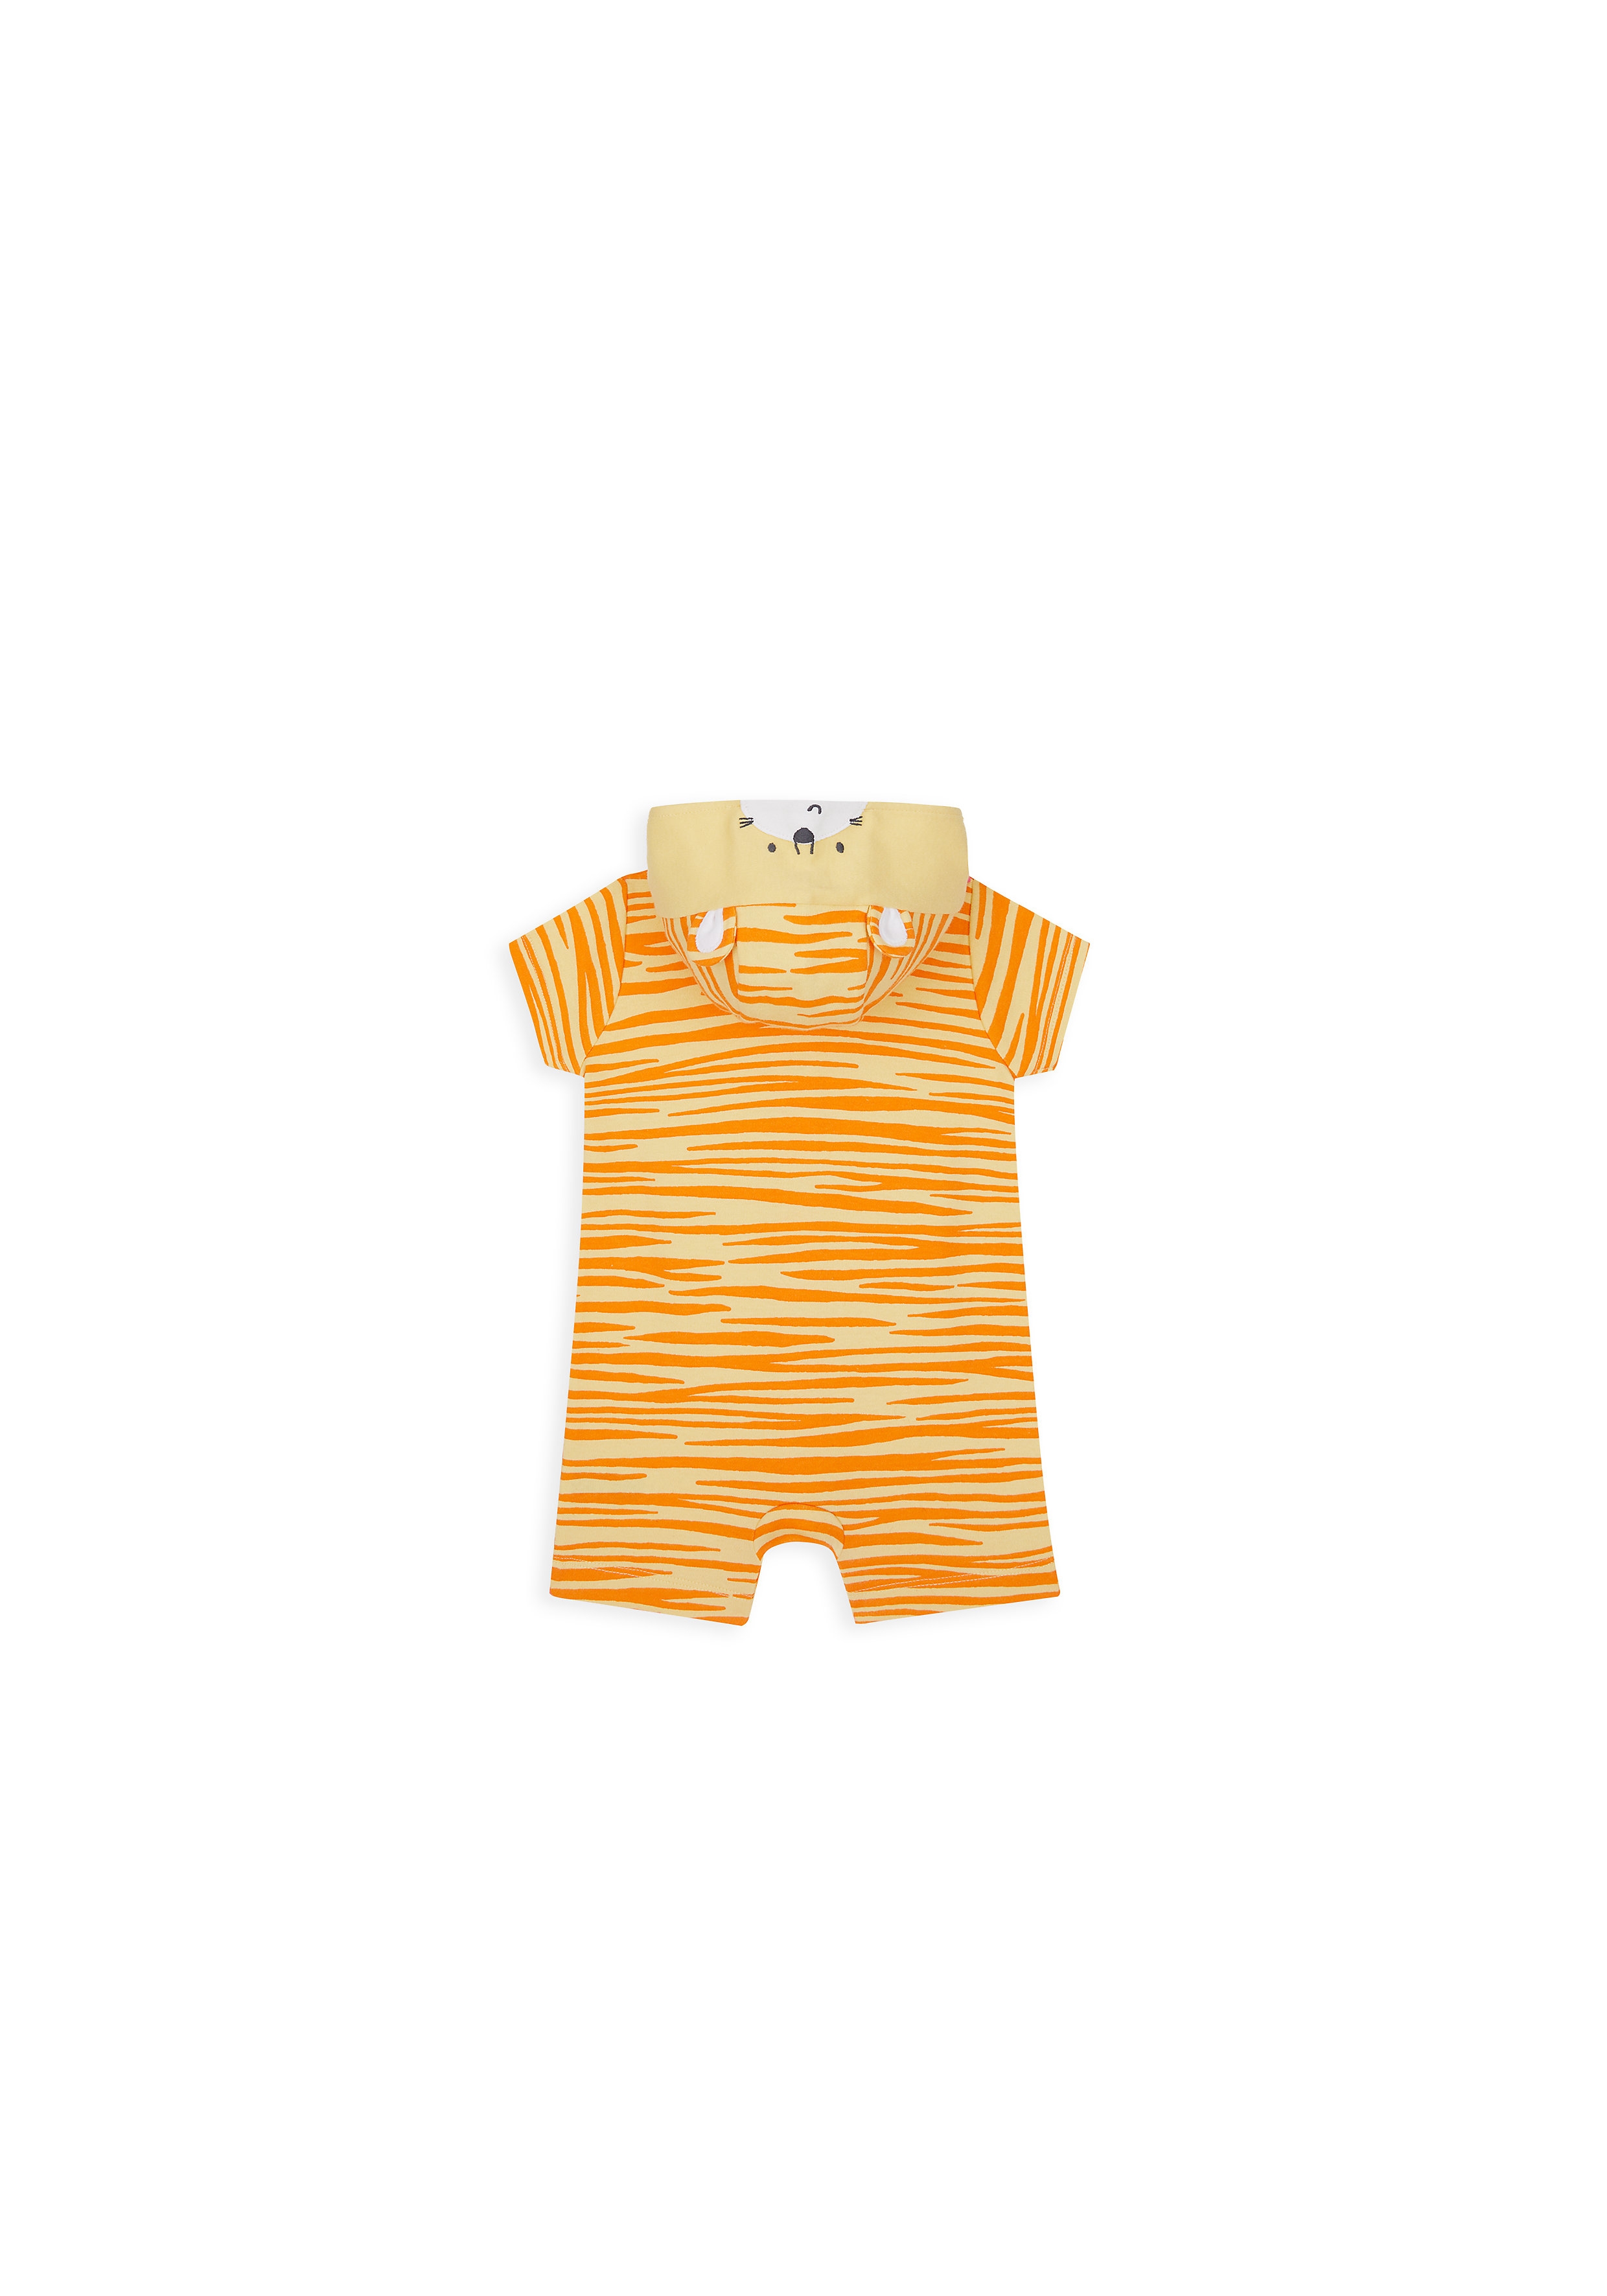 Mothercare | Unisex Half Sleeves Romper 3D Details - Yellow 1